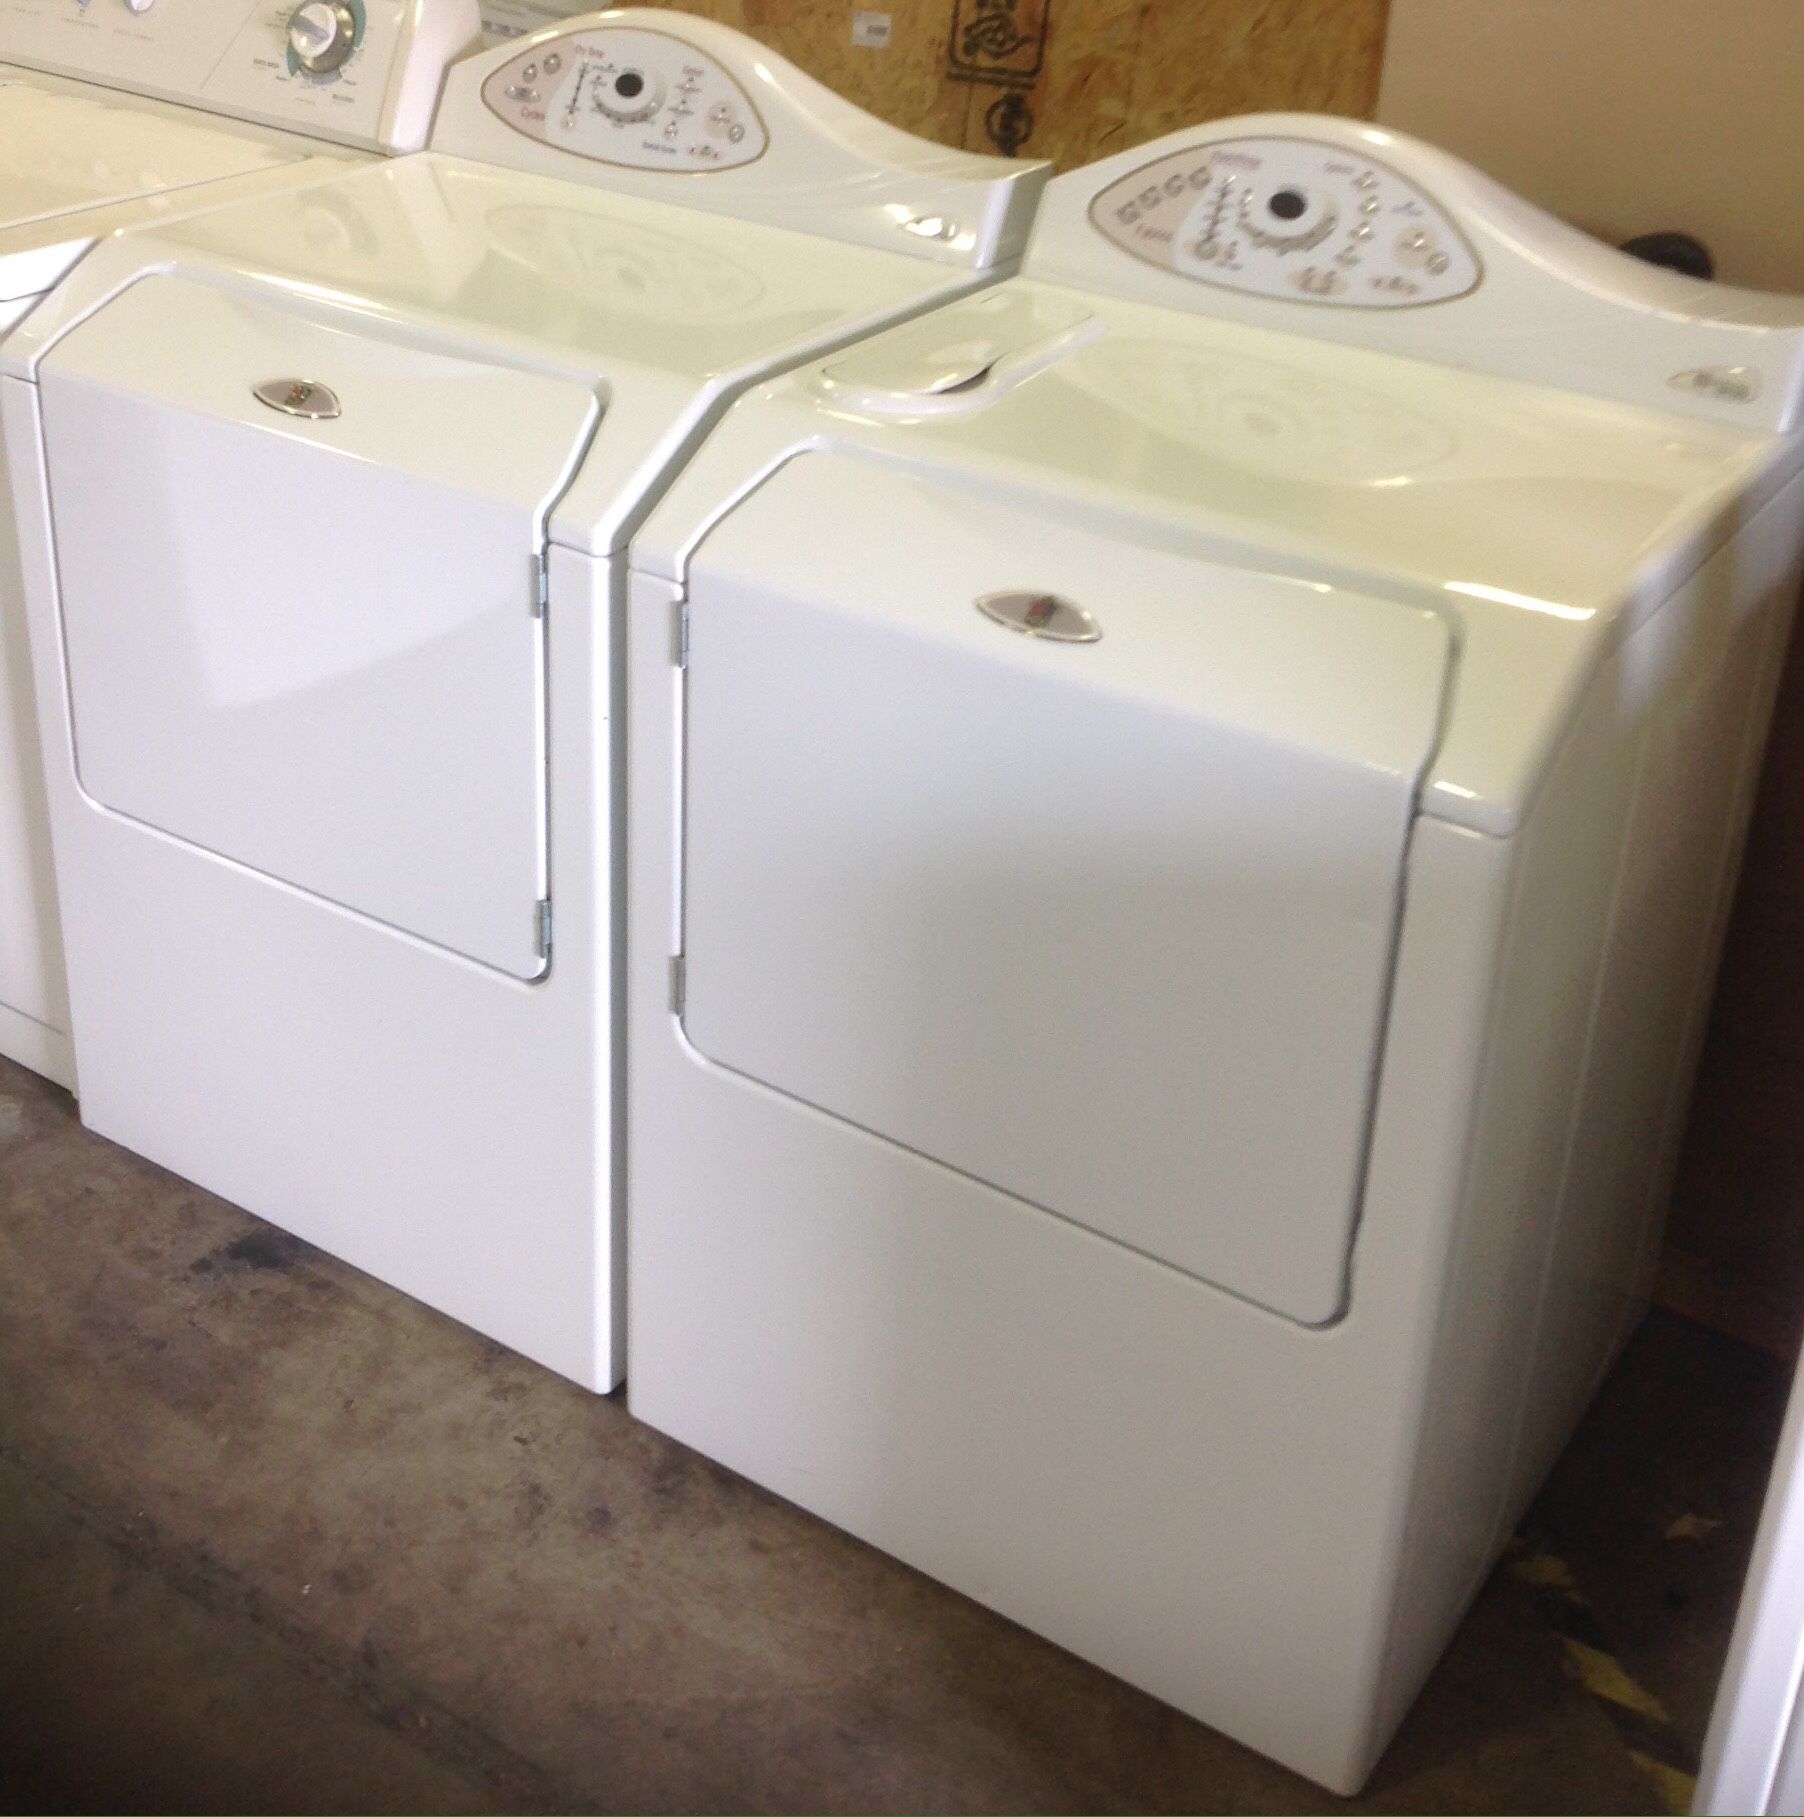 Maytag Neptune gas washer and dryer